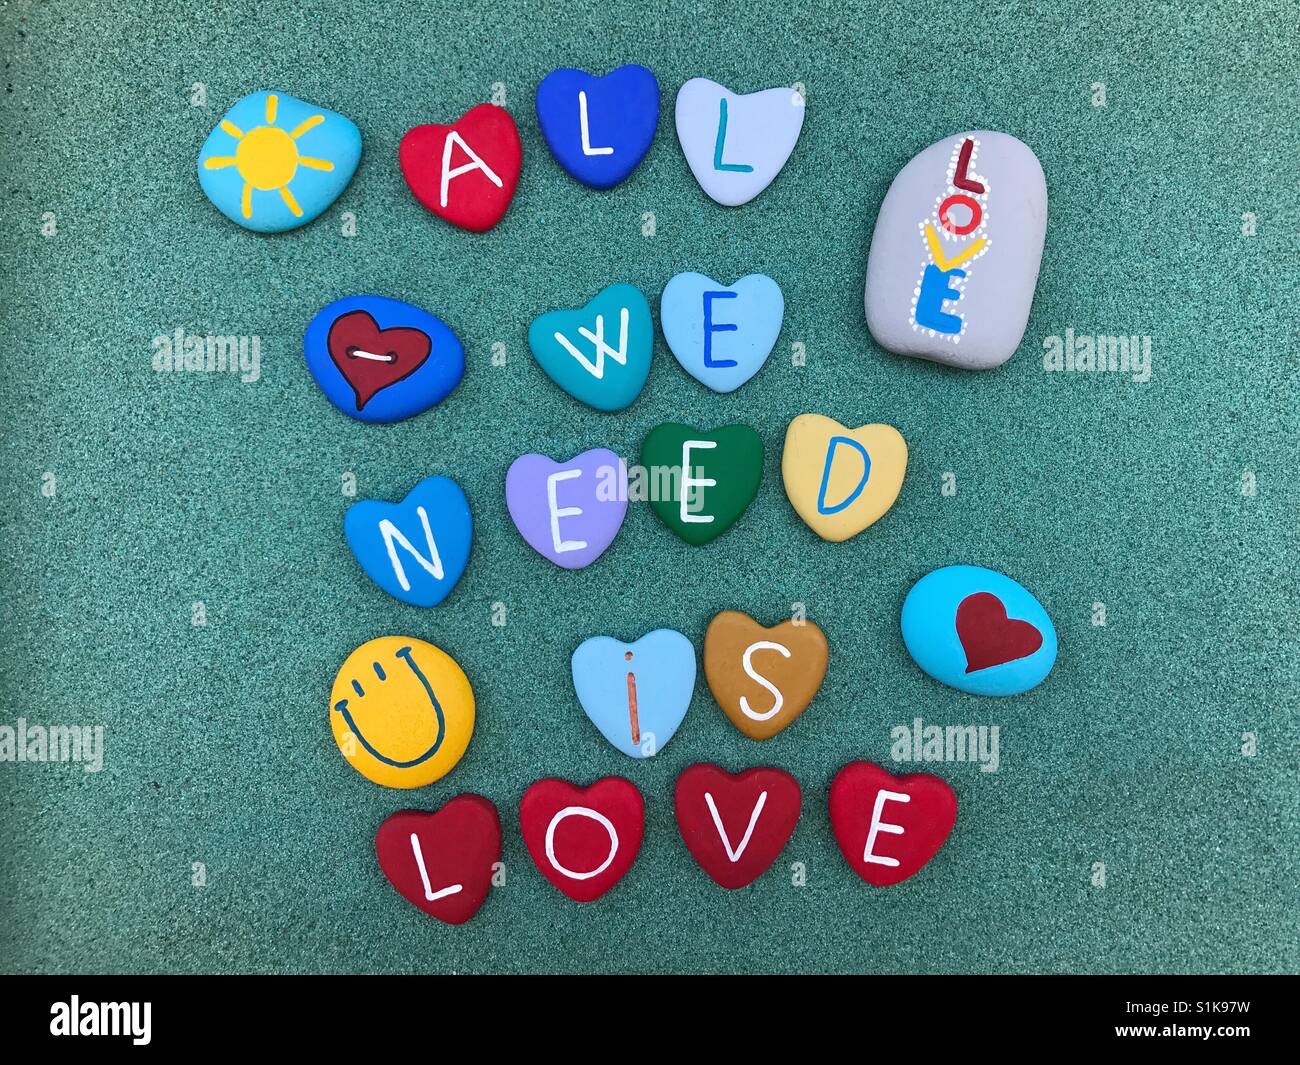 All we need is love Stock Photo